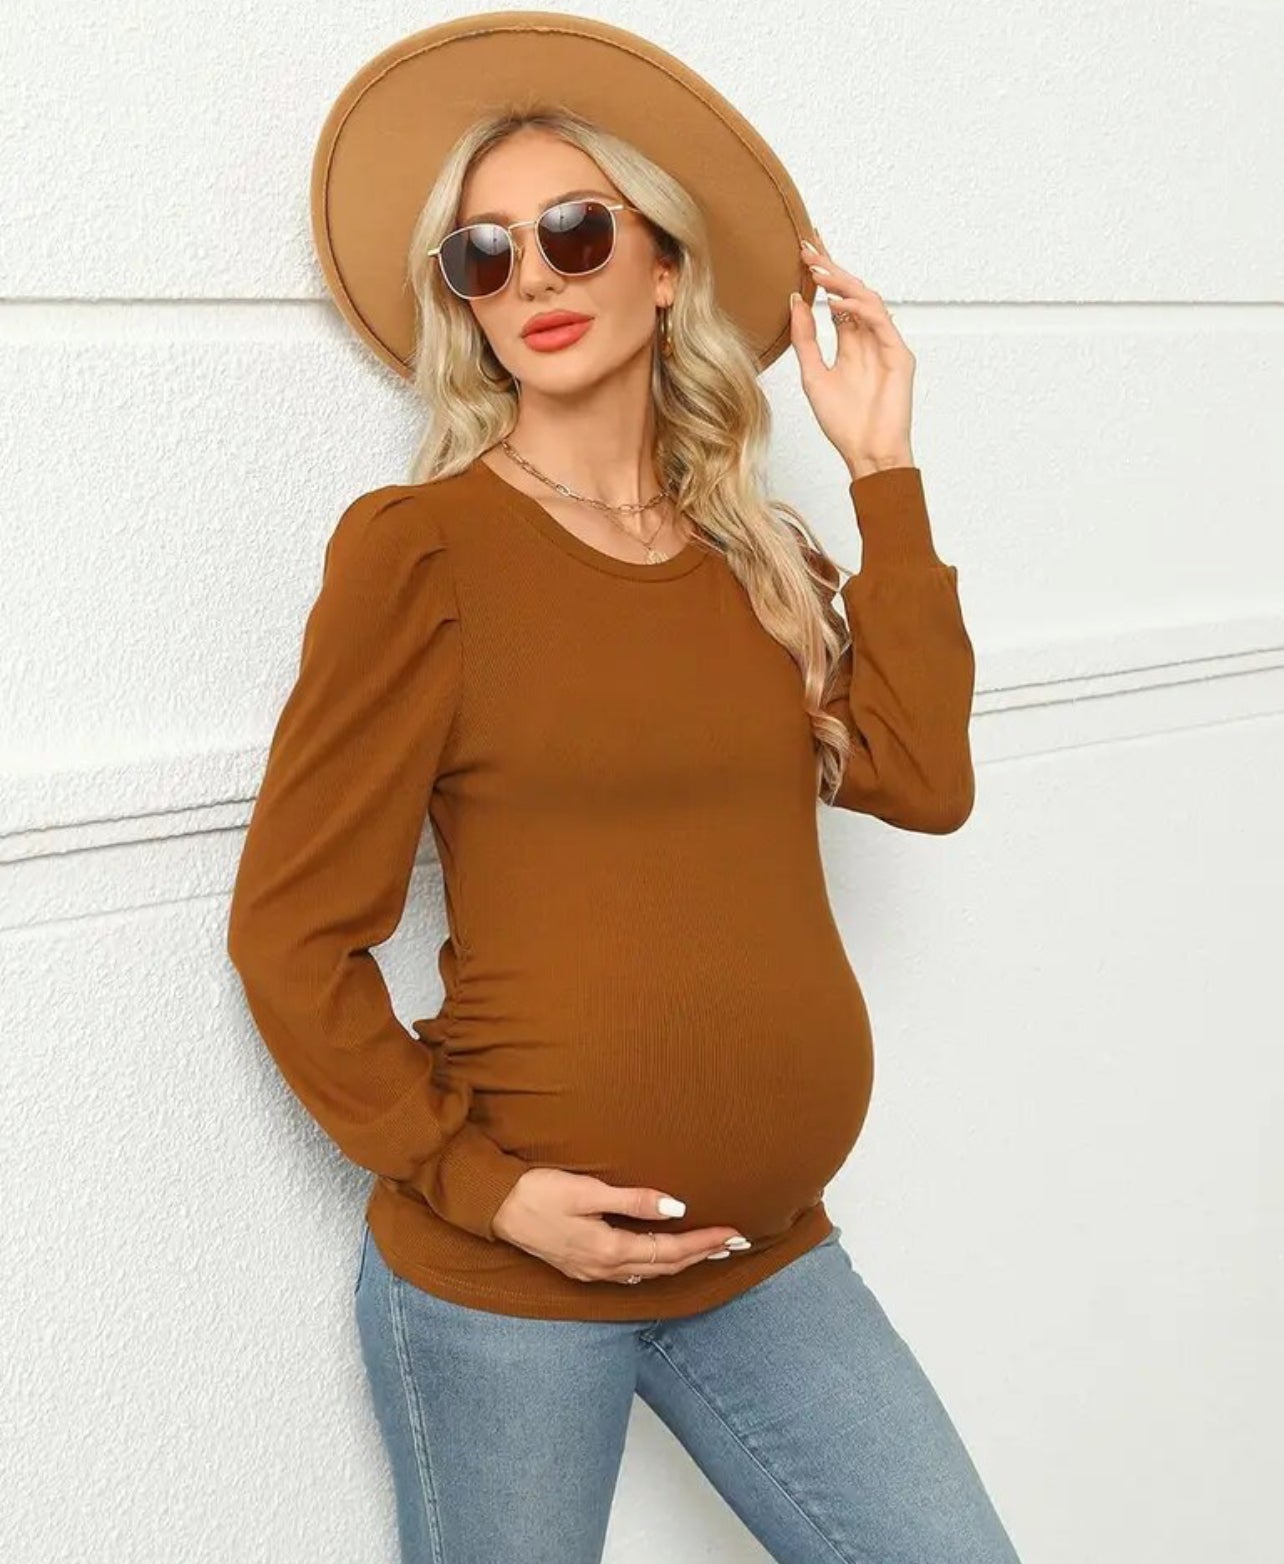 Baby 🌙🌟 Bumps Maternity Collection, Carmel Macchiato, Solid Textured Sweatshirt, Puff Sleeve Crew Neck Top